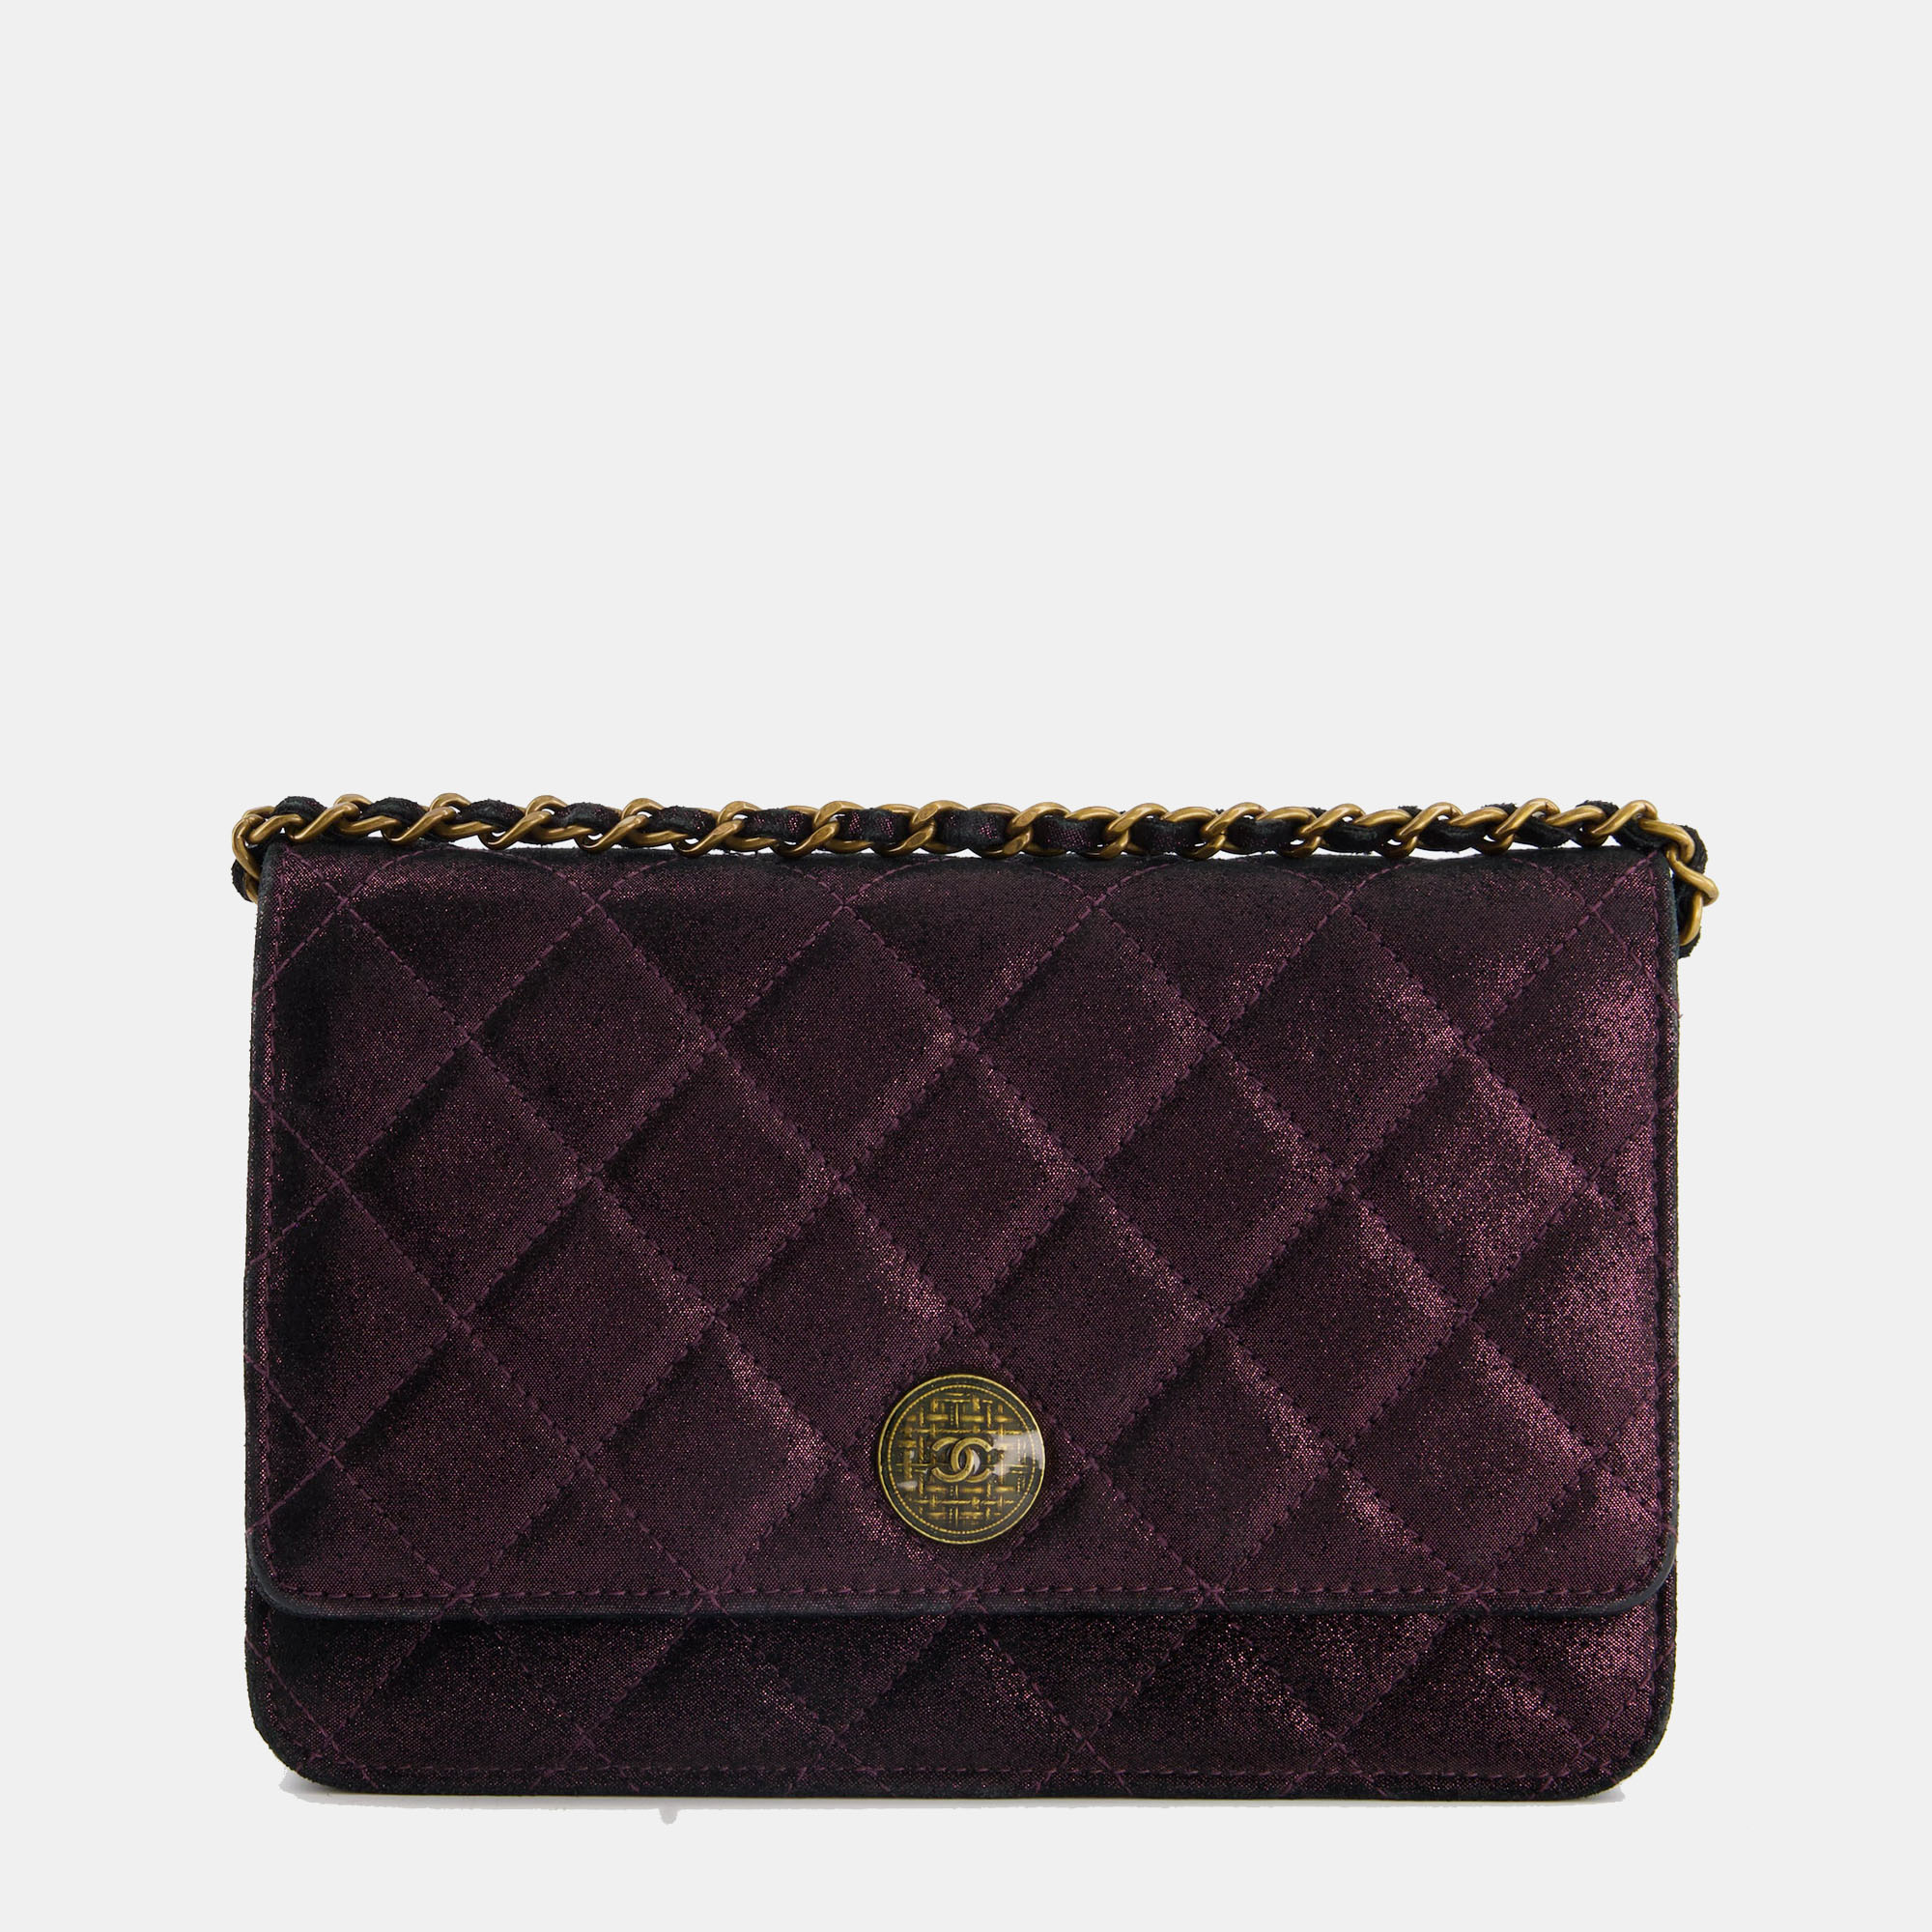 Chanel metallic purple wallet on chain with antique gold hardware